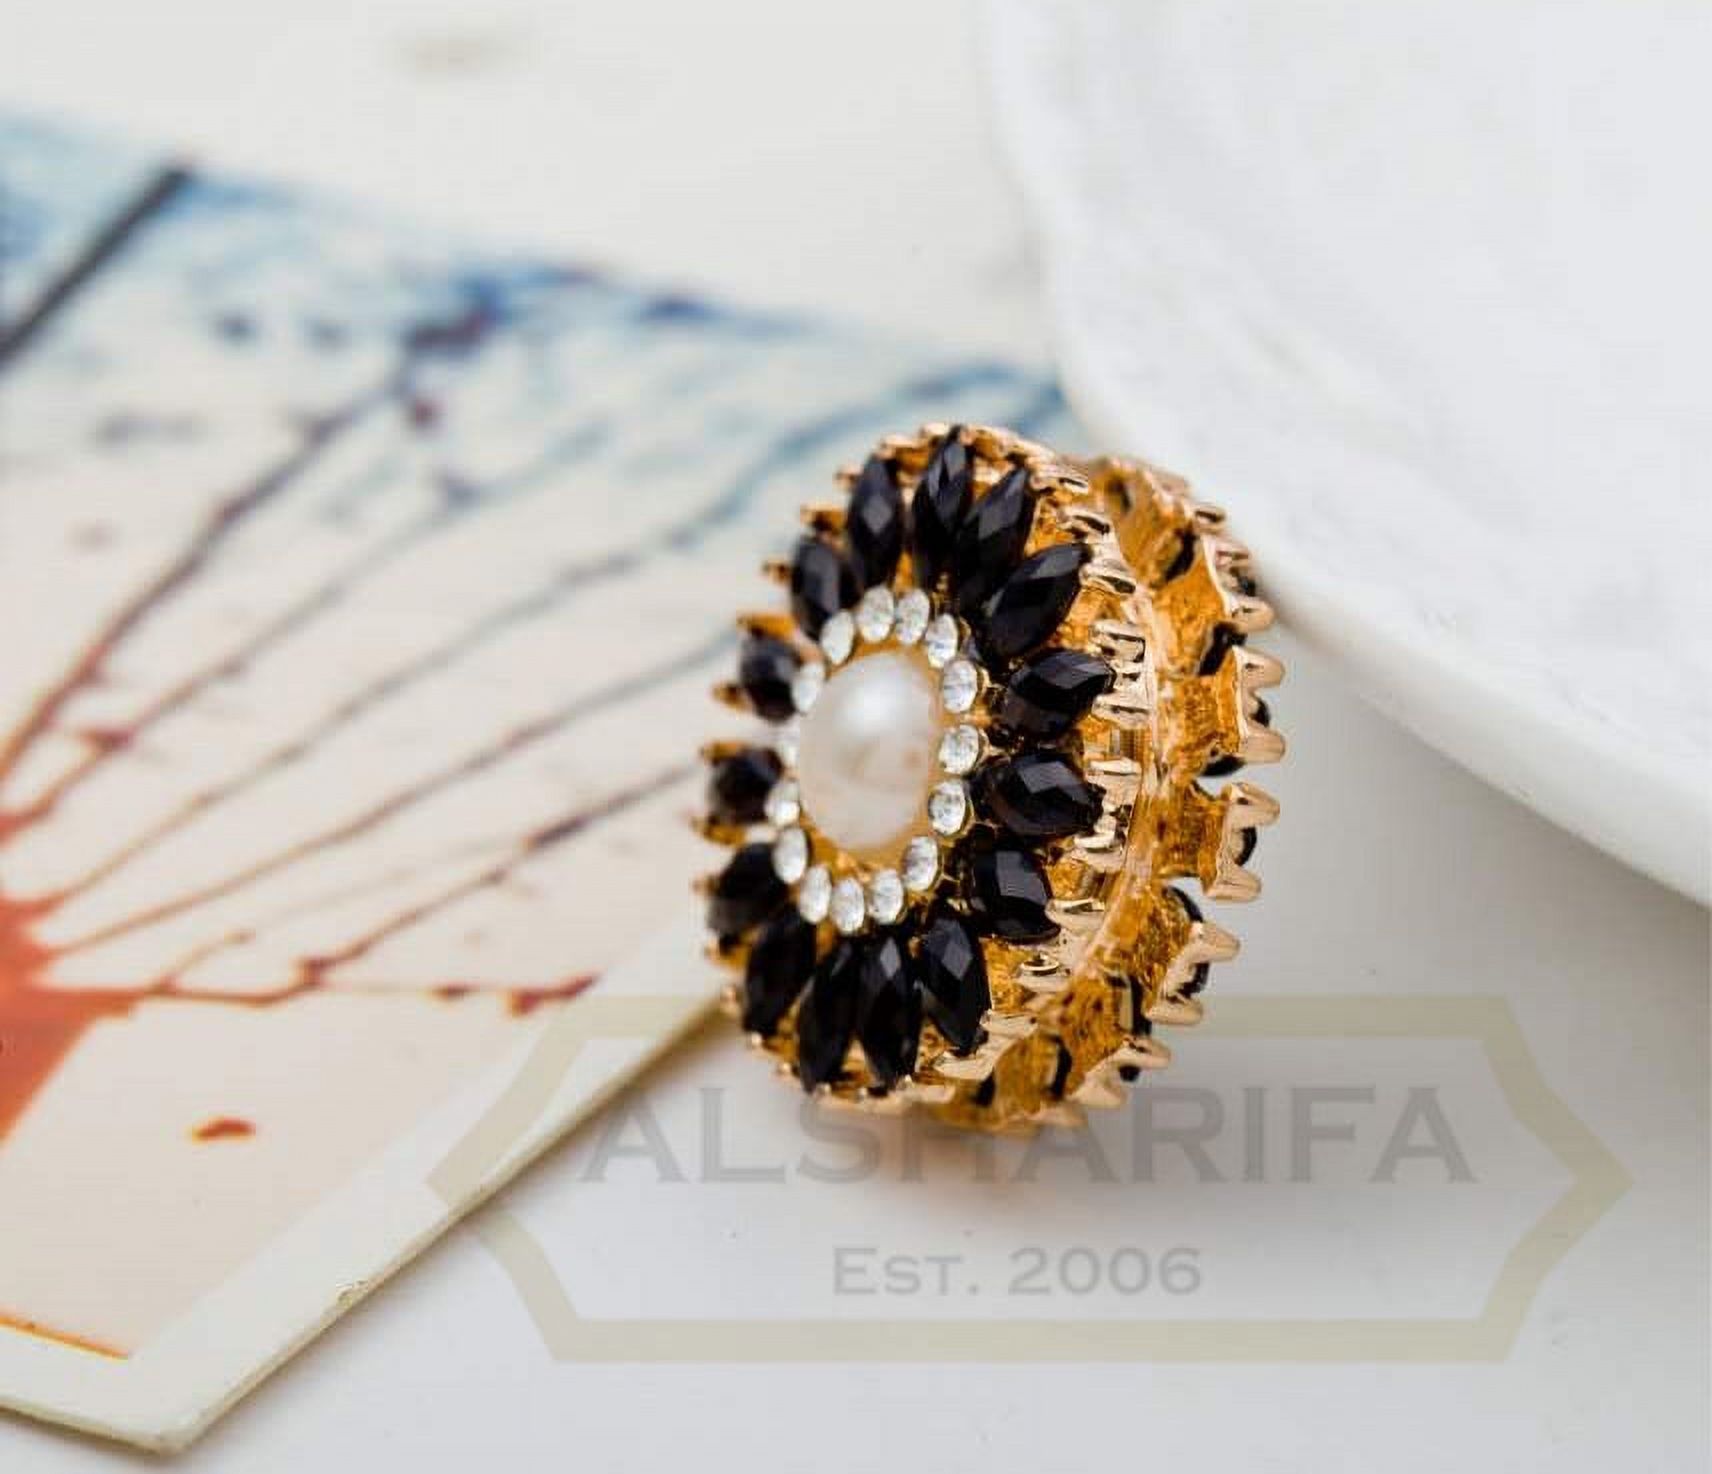 6 x Pinless Magnetic Pins for Hijab Scarves | Rhinestone Magnet Button /  Brooch [Style: Sunflower]